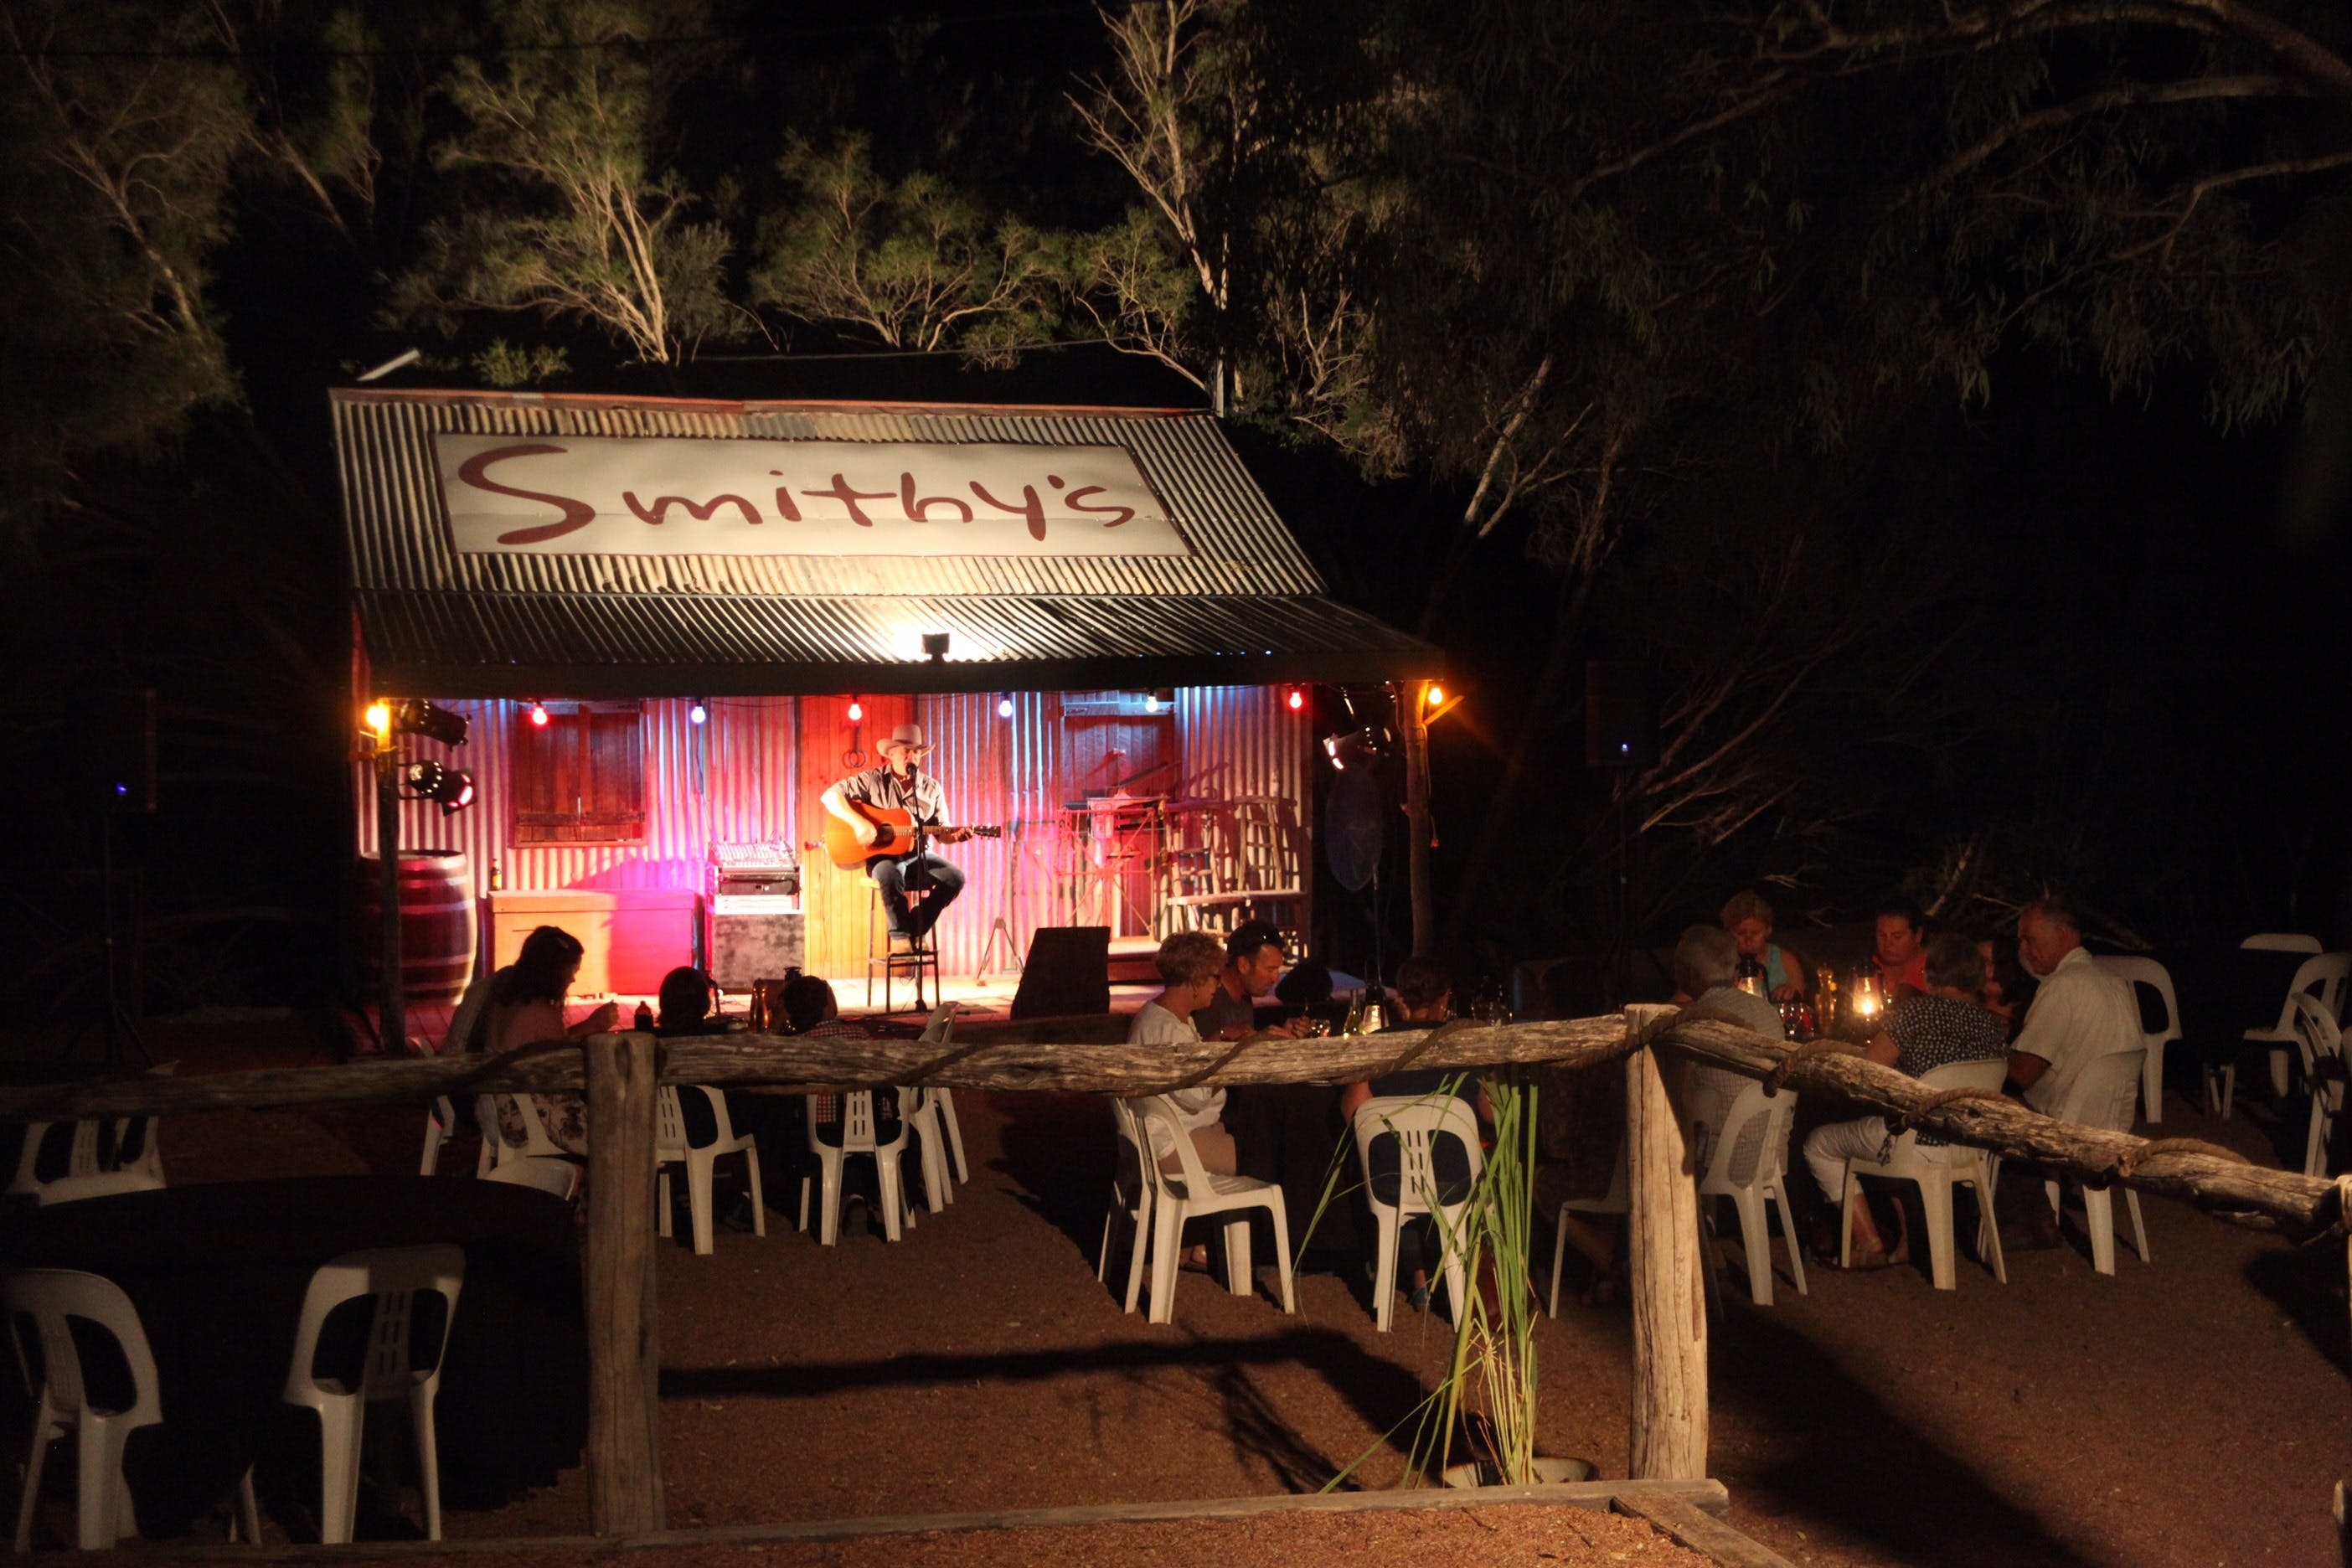 Smithy's Outback Dinner and Show - WA Accommodation